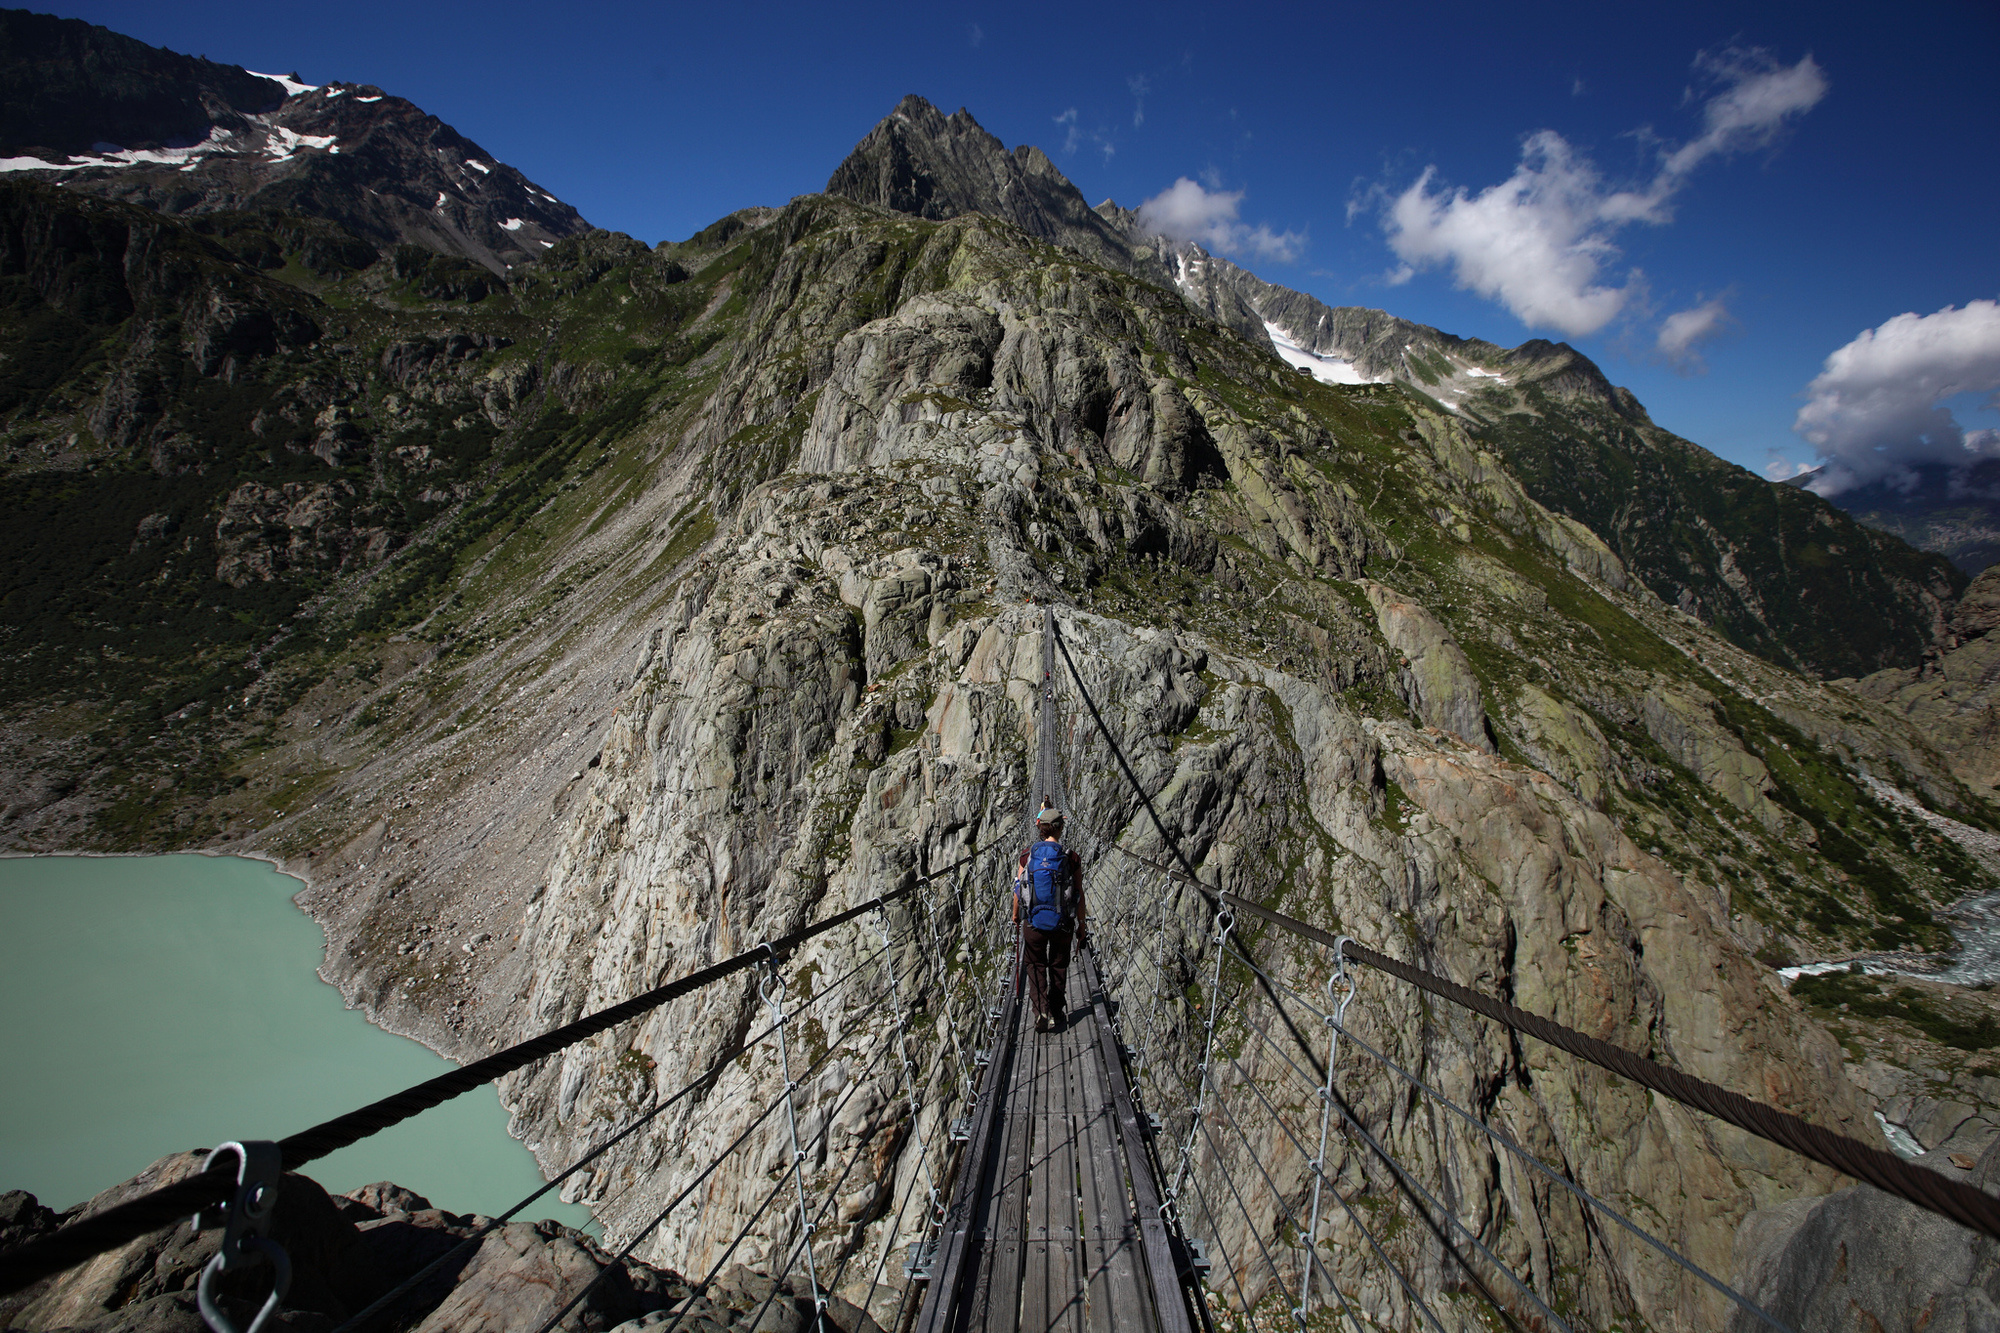 Cross the Trift Suspension Bridge (the longest pedestrian only suspension bridge in the Swiss Alps) 328 feet high and 557 feet long above the Trift Glacier.